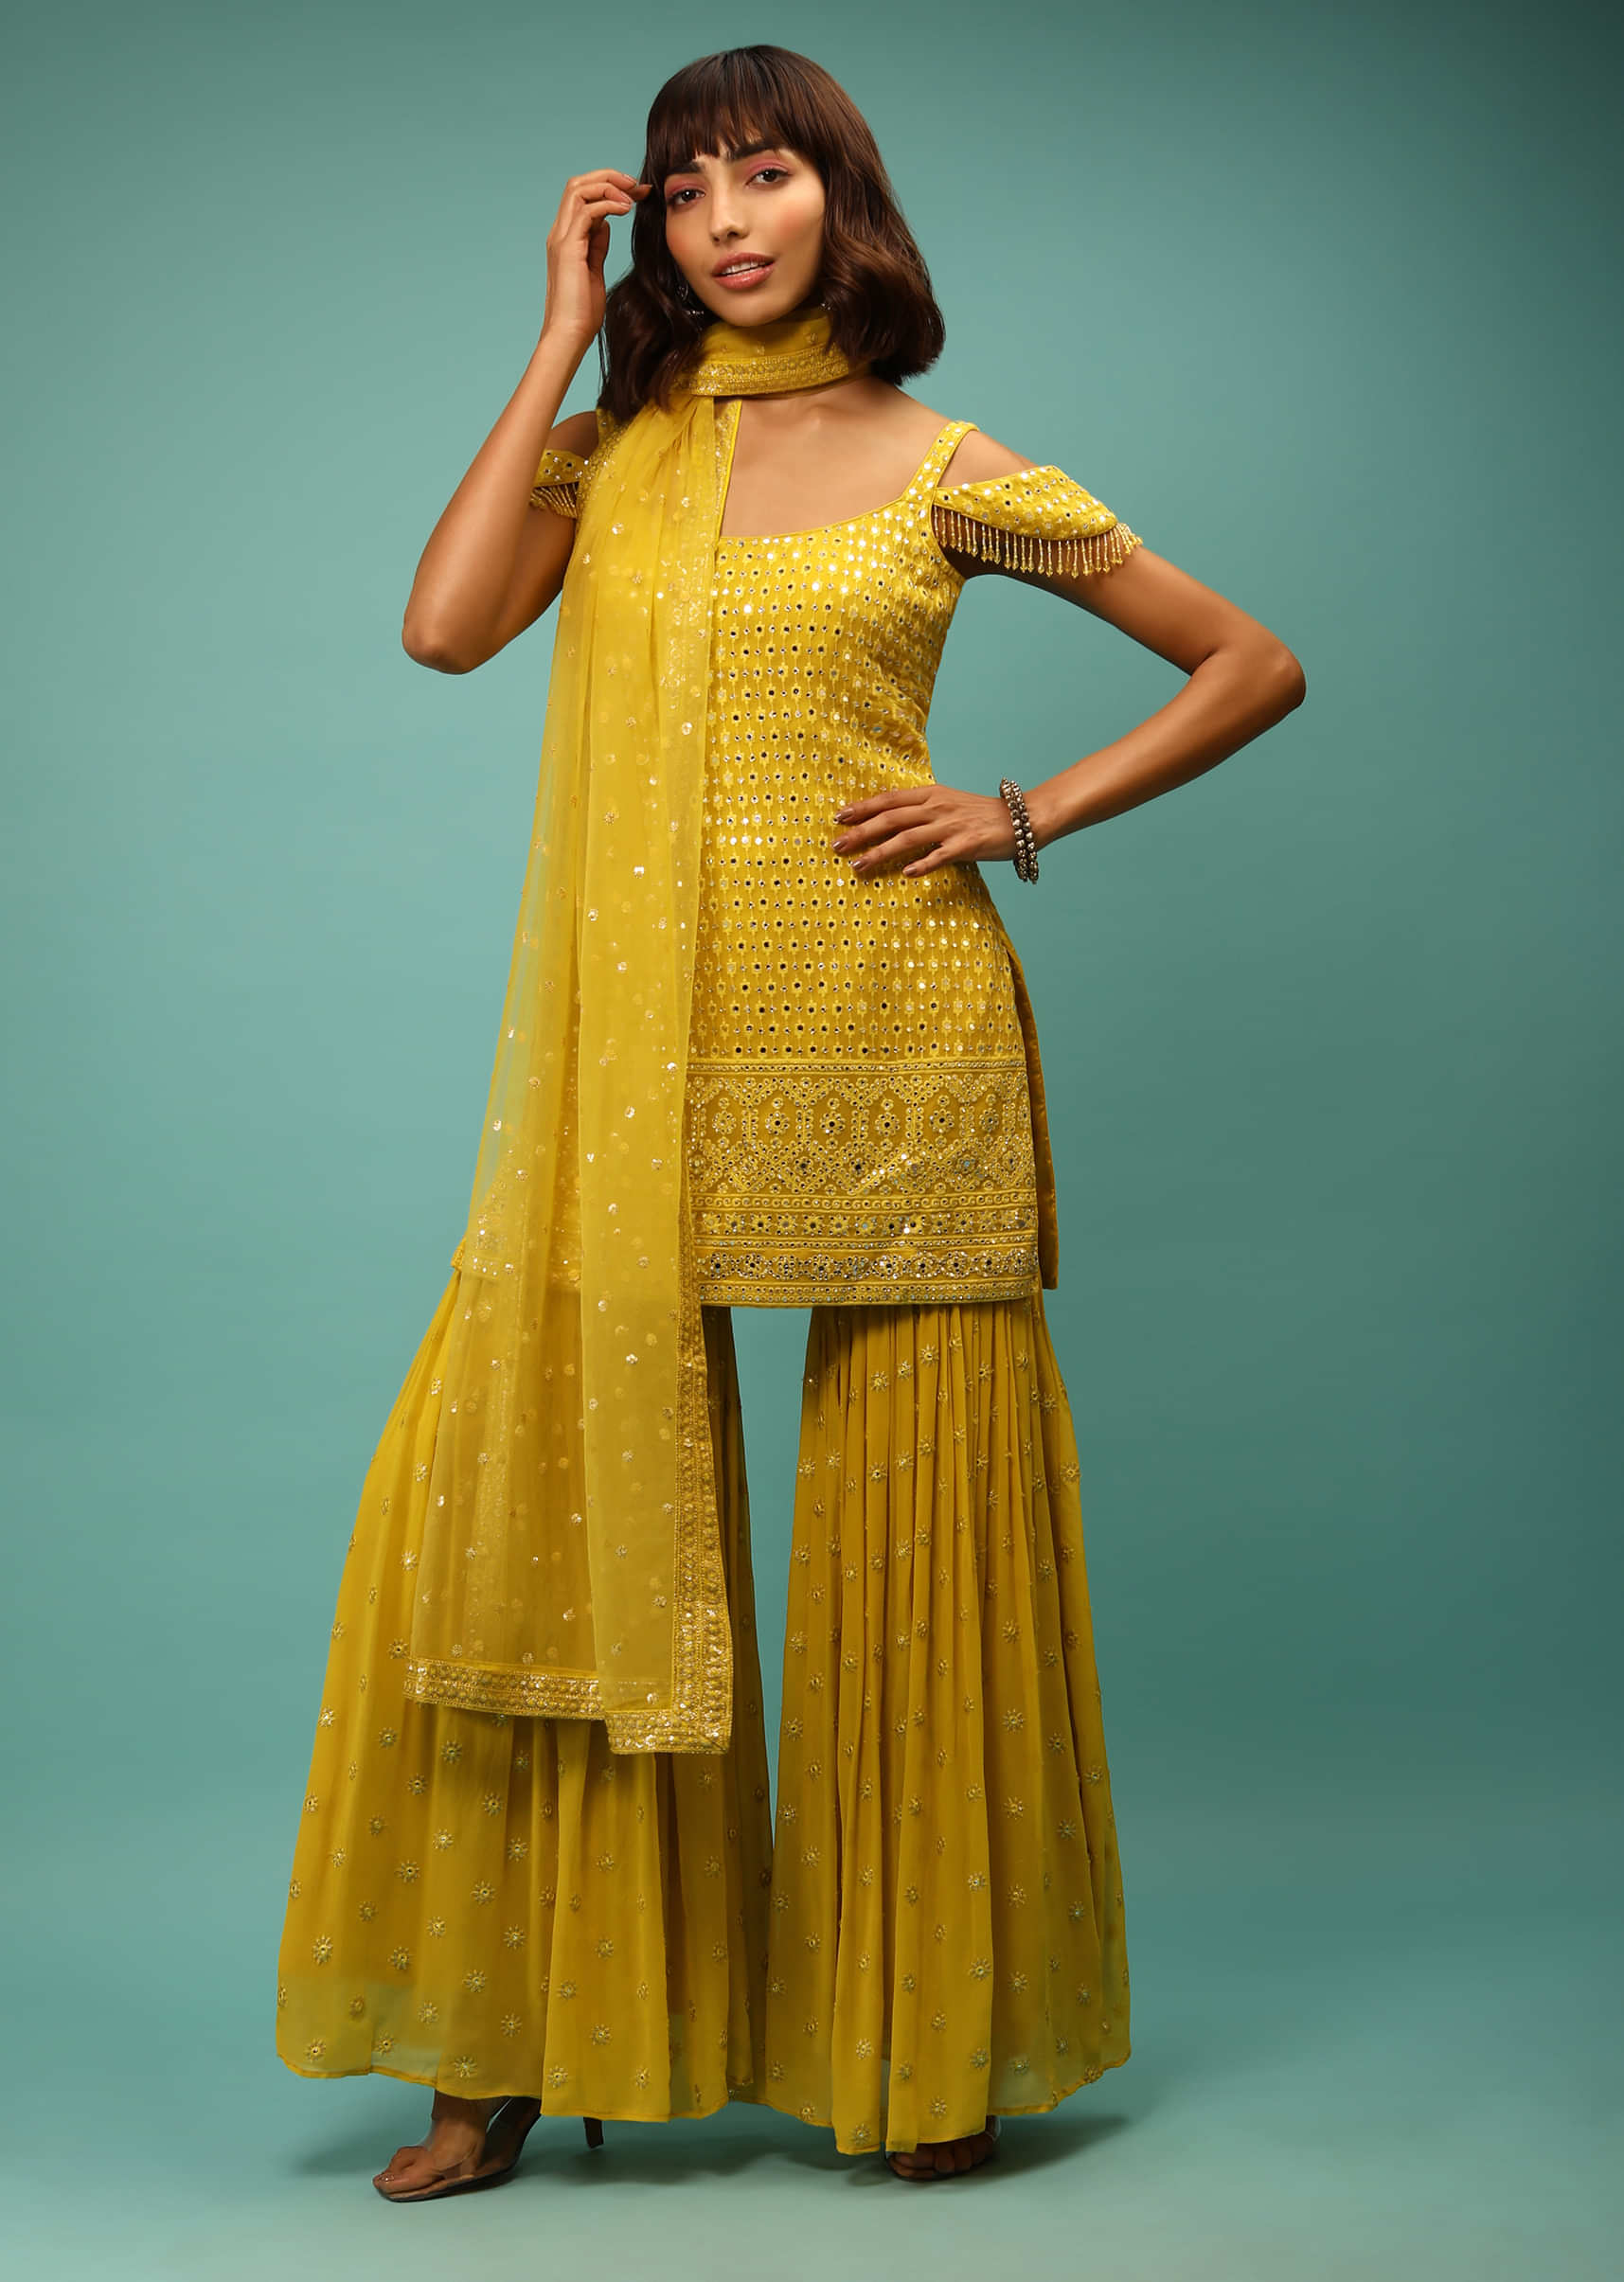 Sulphur Yellow Sharara Suti In Georette With Mirror Work And Fringed Cold Shoulder Sleeves 